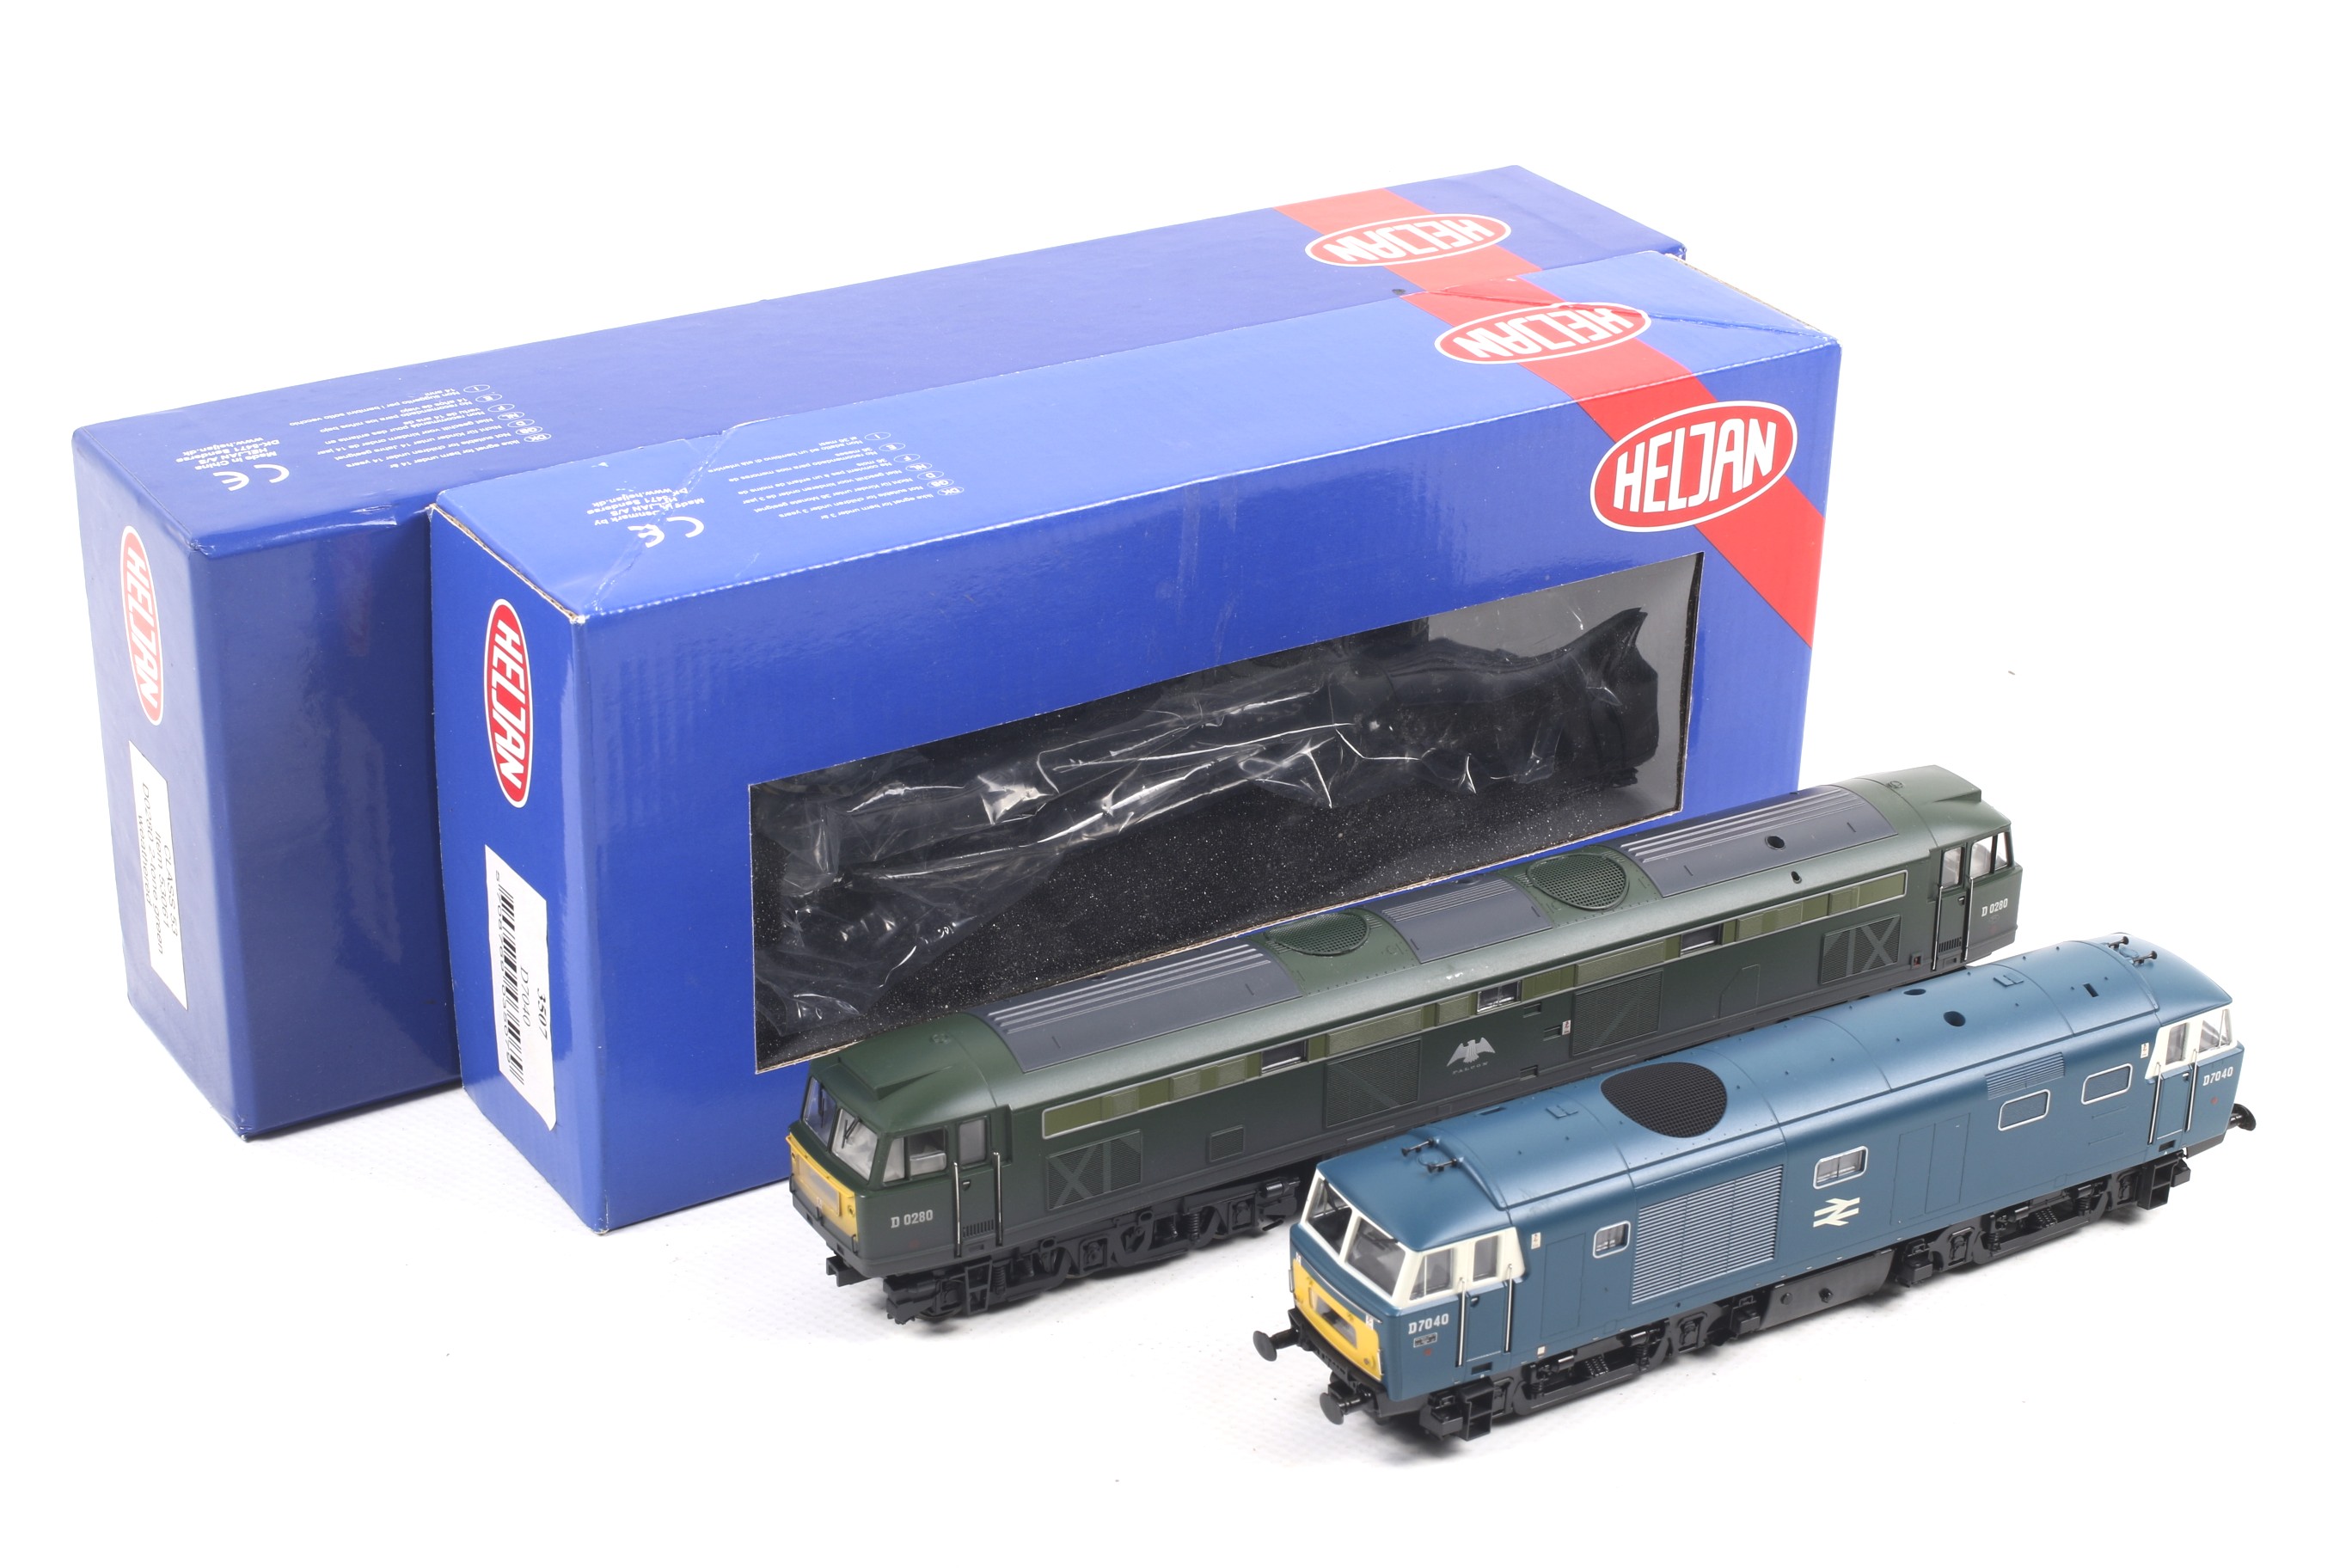 Two Heljan OO gauge diesel locomotives. Comprising one Hymek no. D7040 and one class 53 Falcon no.